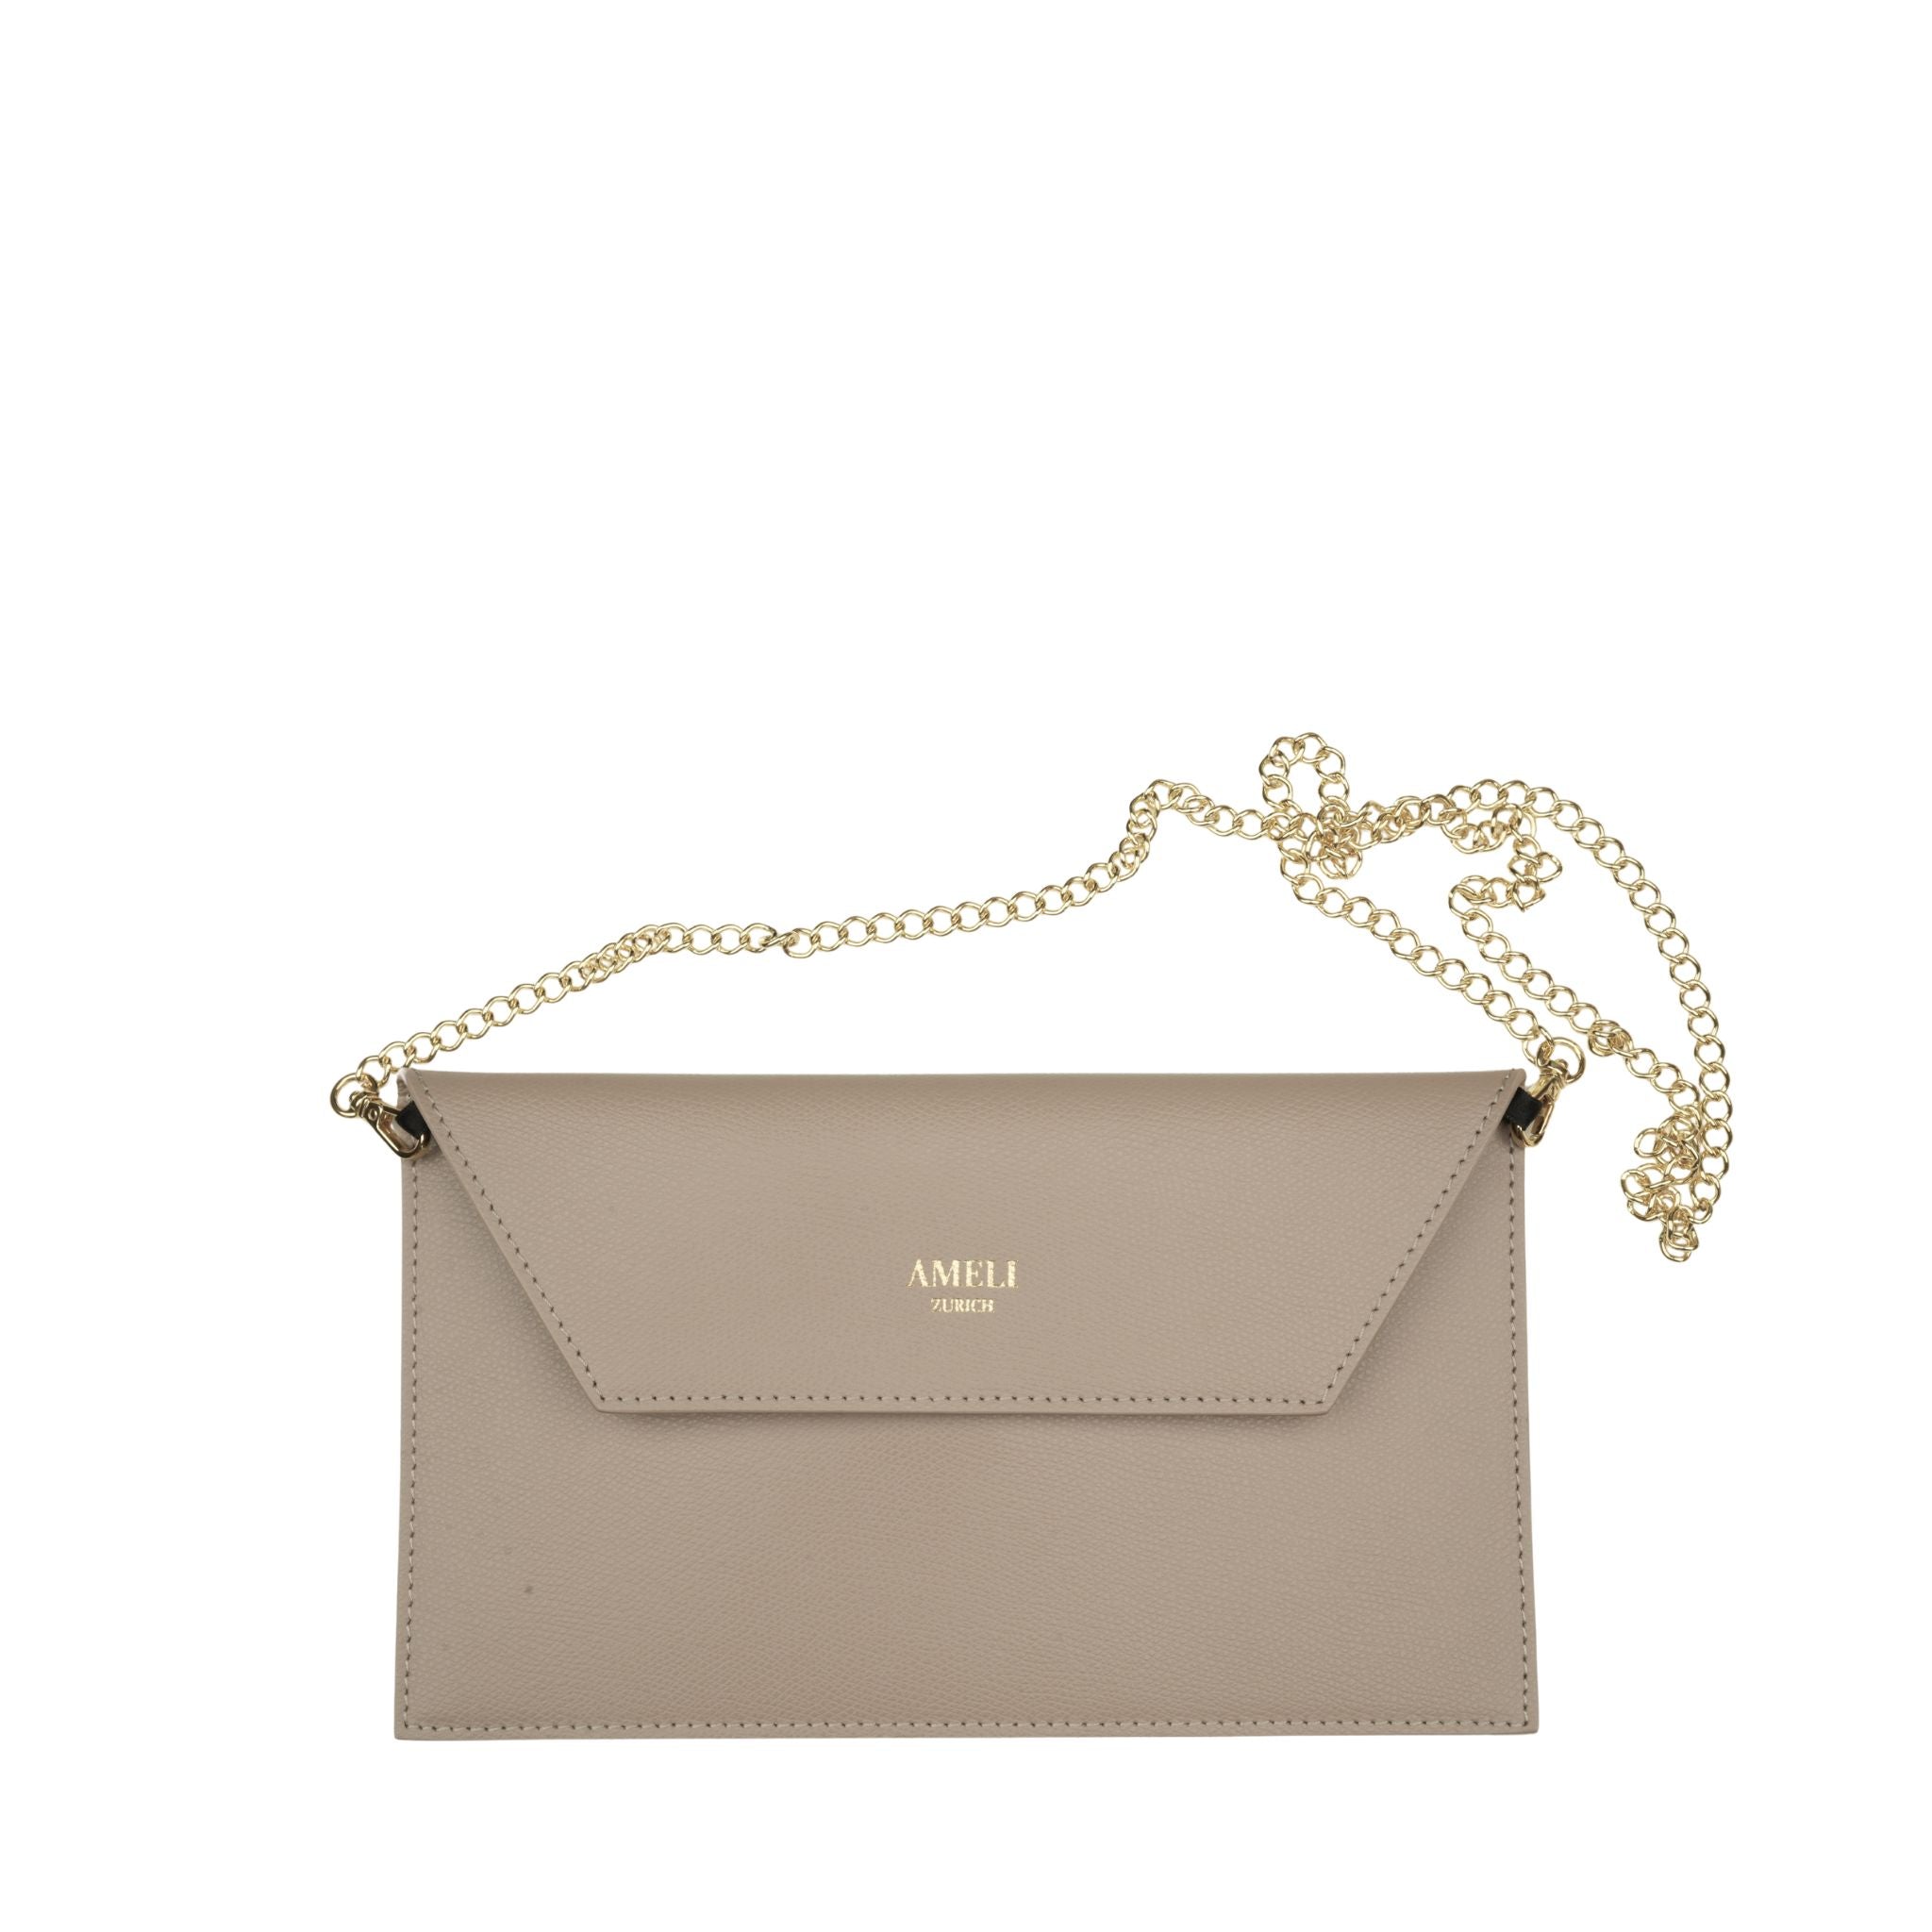 AMELI Zurich | Clutch | Cappuccino | Pebbled Leather | Front with gold chain